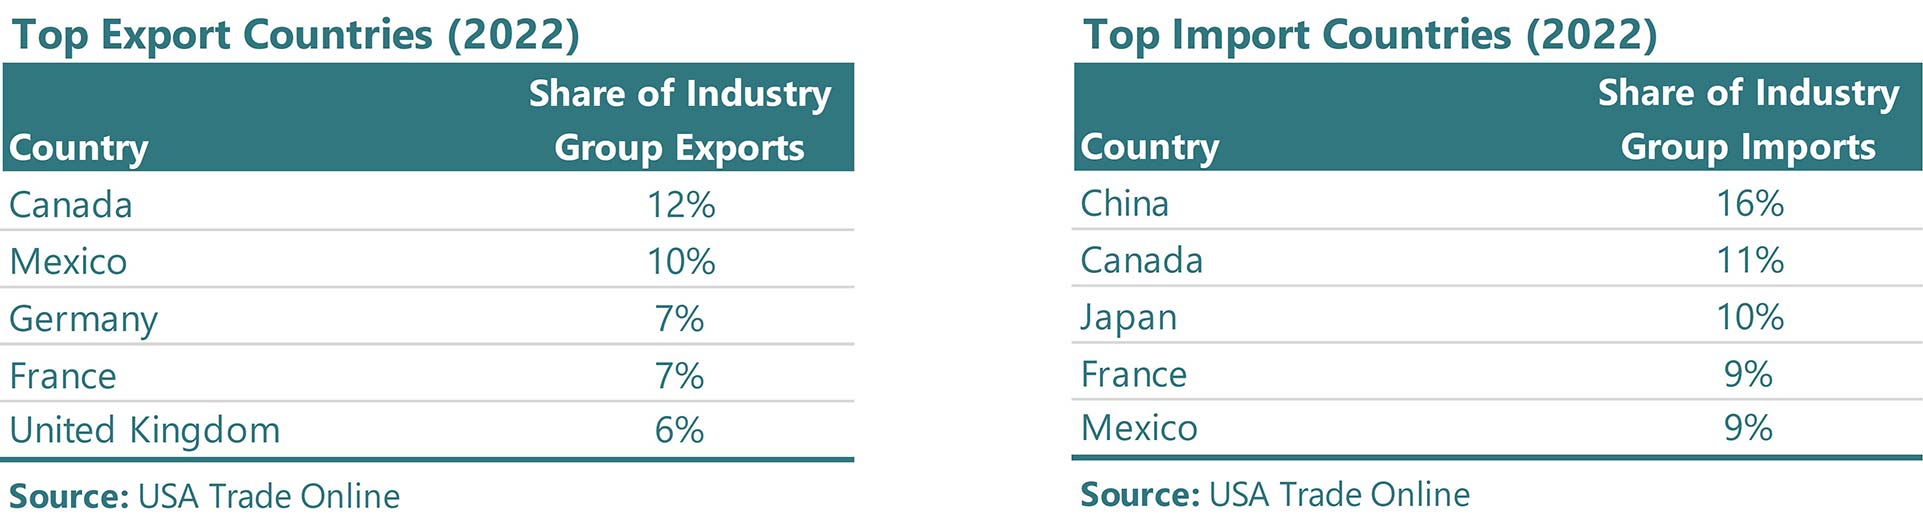 Two charts listing the top export countries and top import countries for Aerospace and Defense in 2022